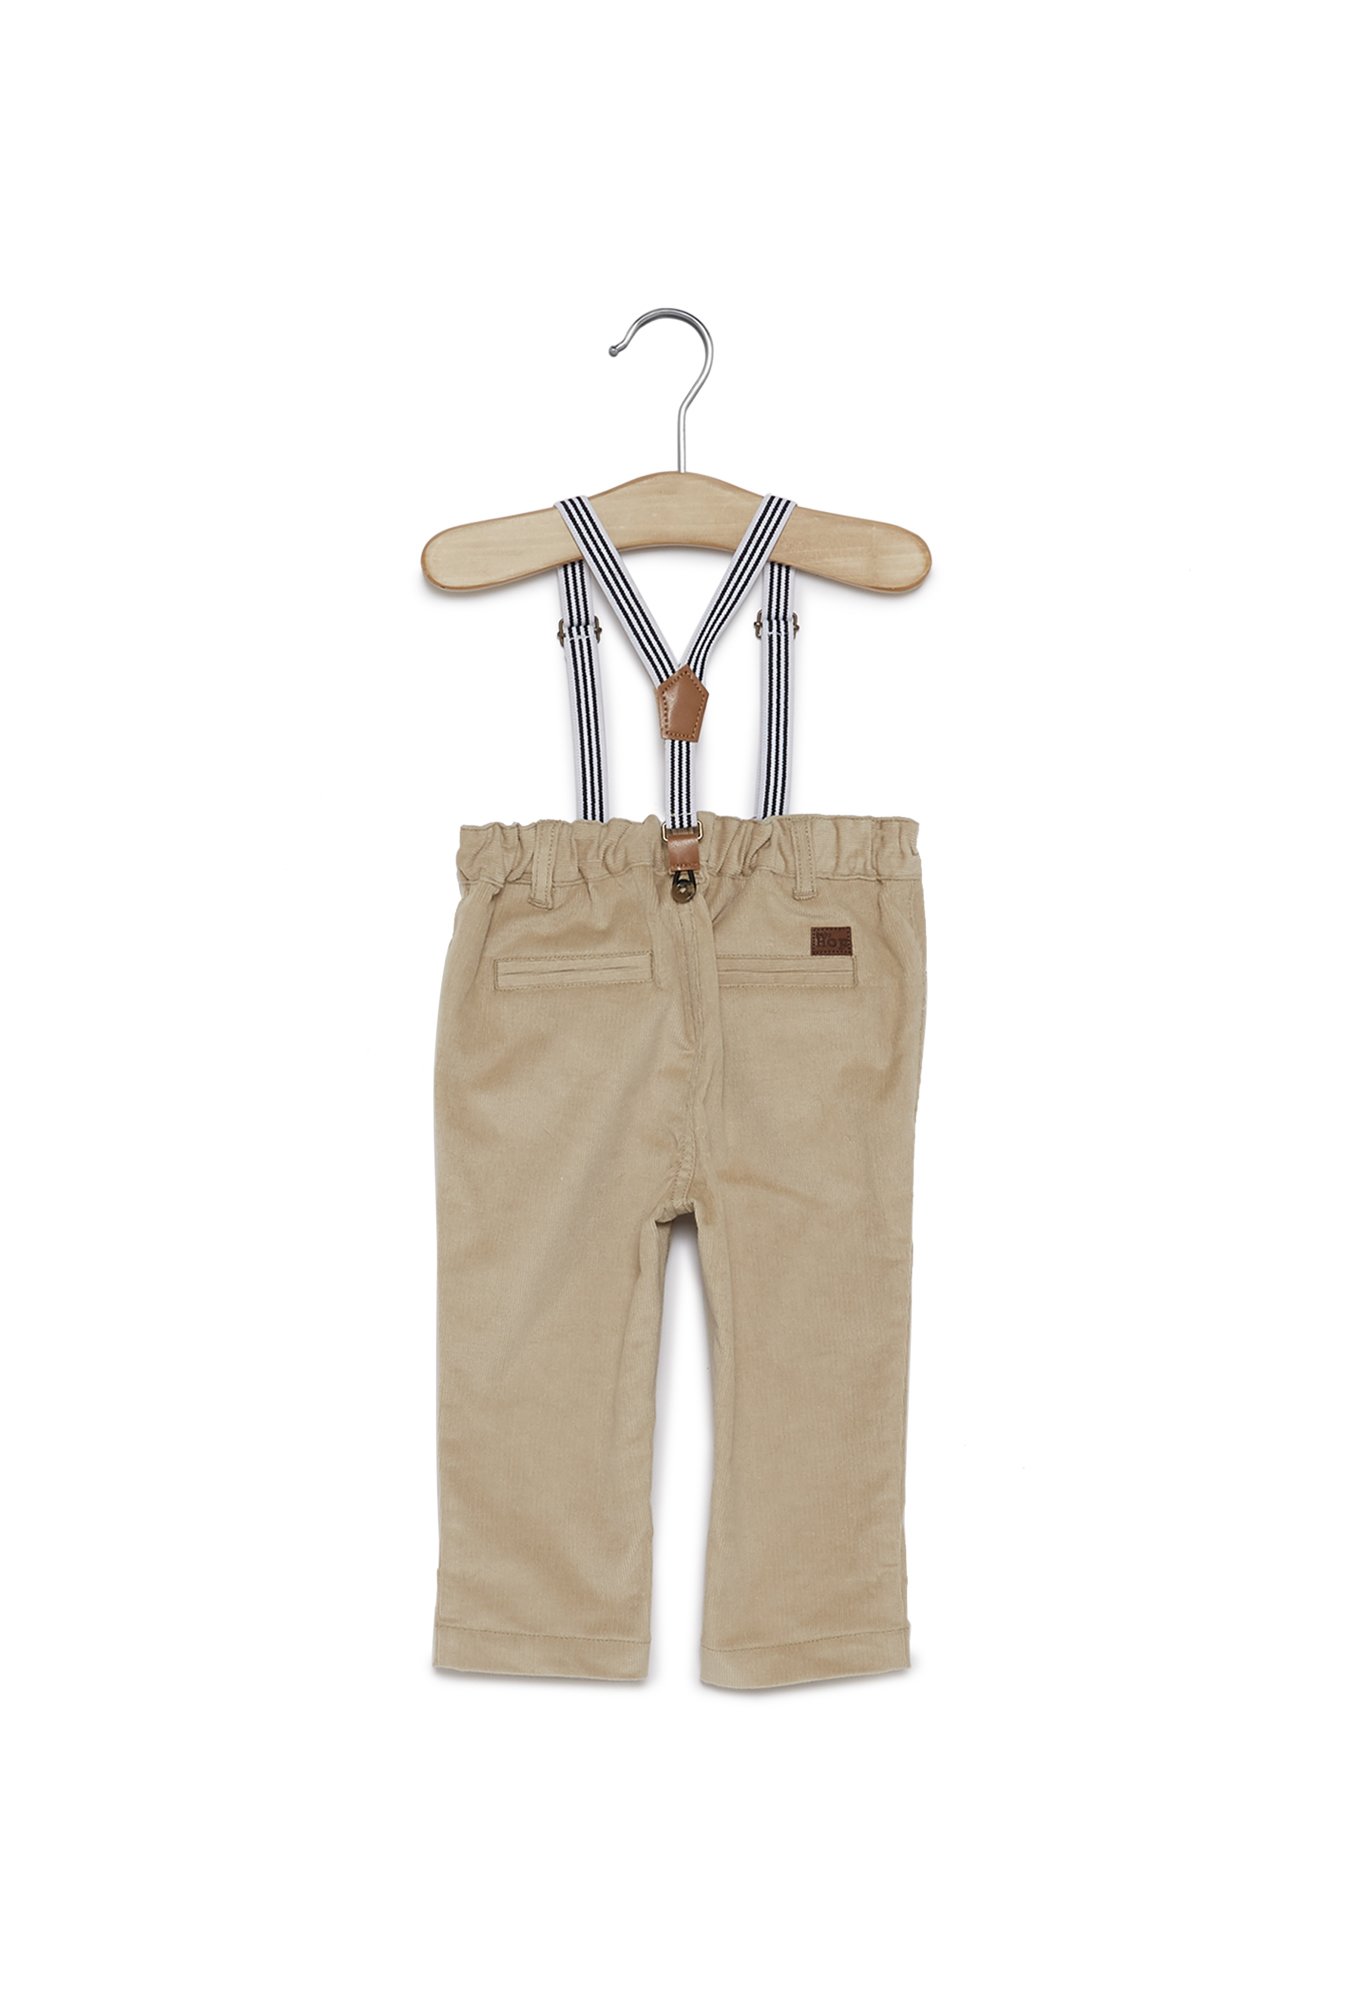 Buy Baby Boys Trousers of Organic Cotton Online  Latest Baby Boy Trousers  at Best Prices in India  World of Born